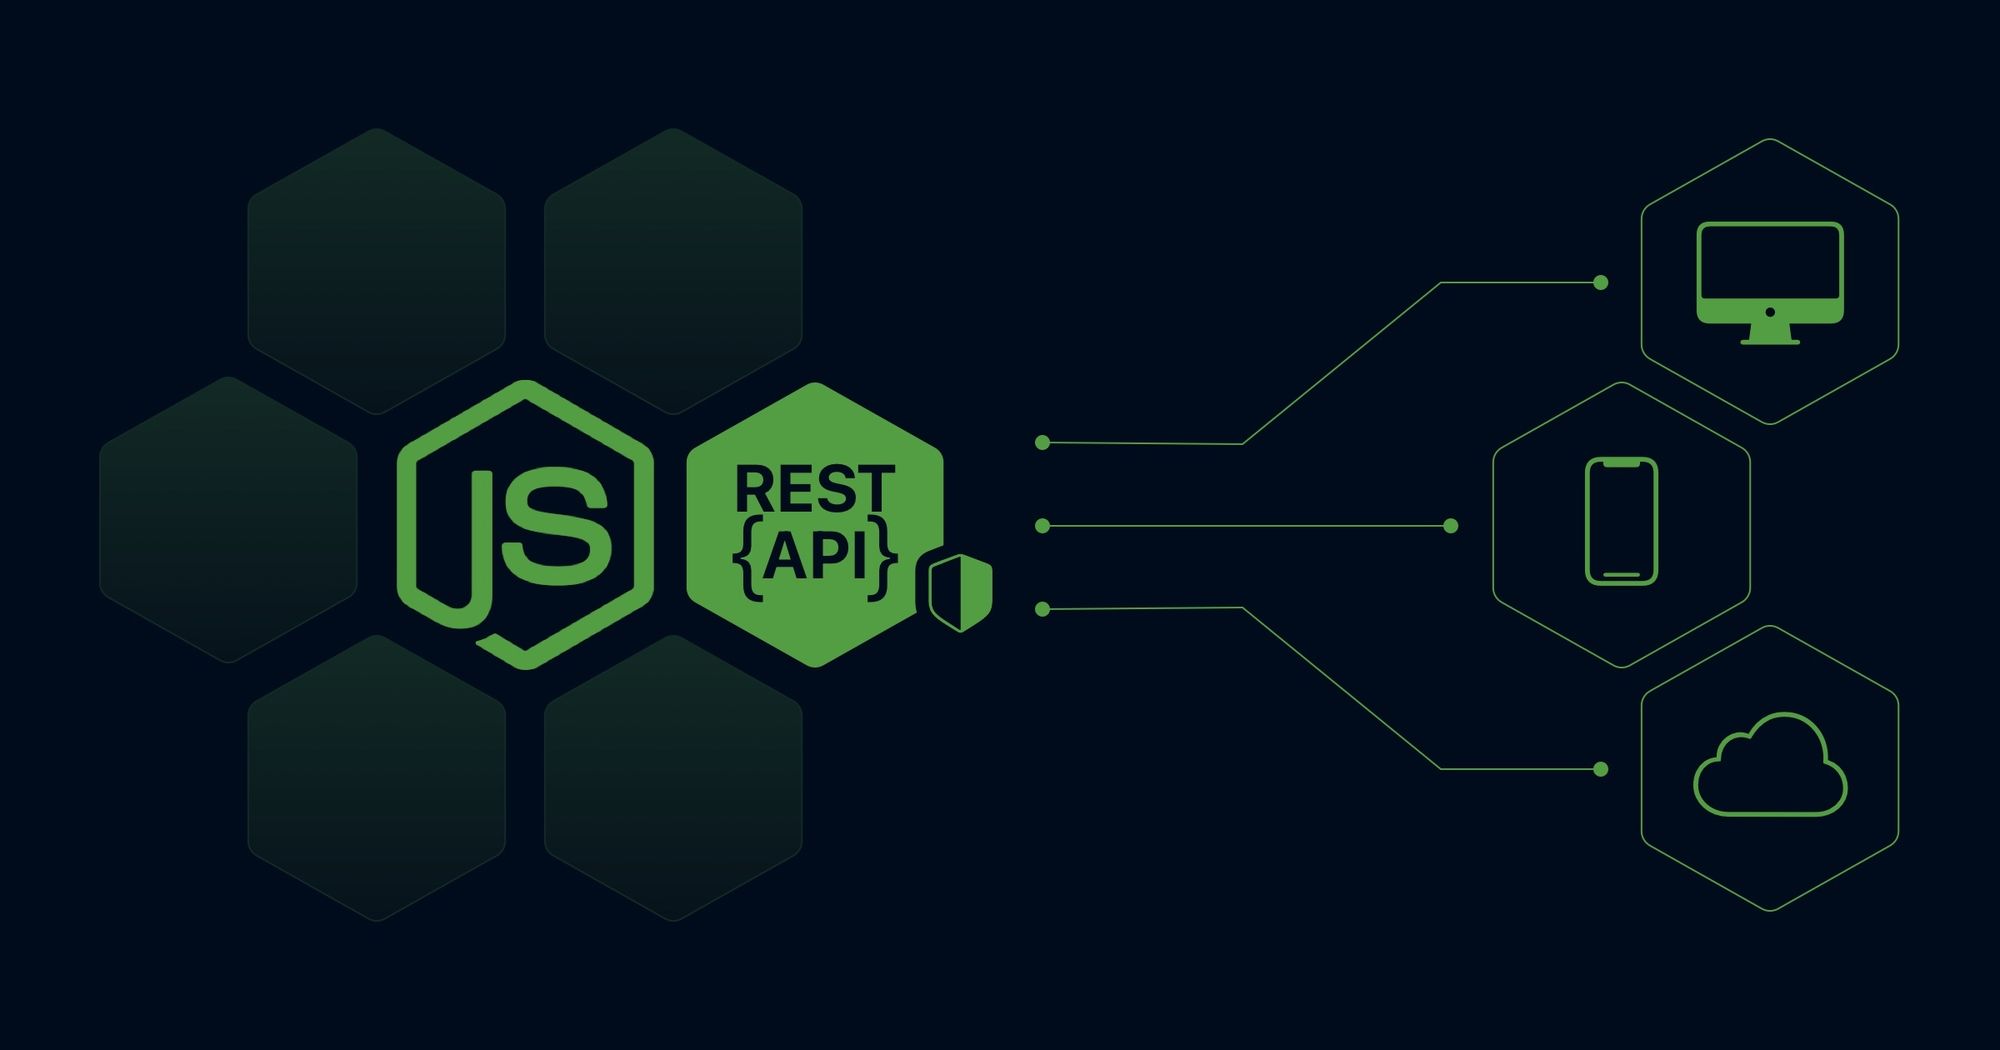 How to structure an Express.js REST API - best practices